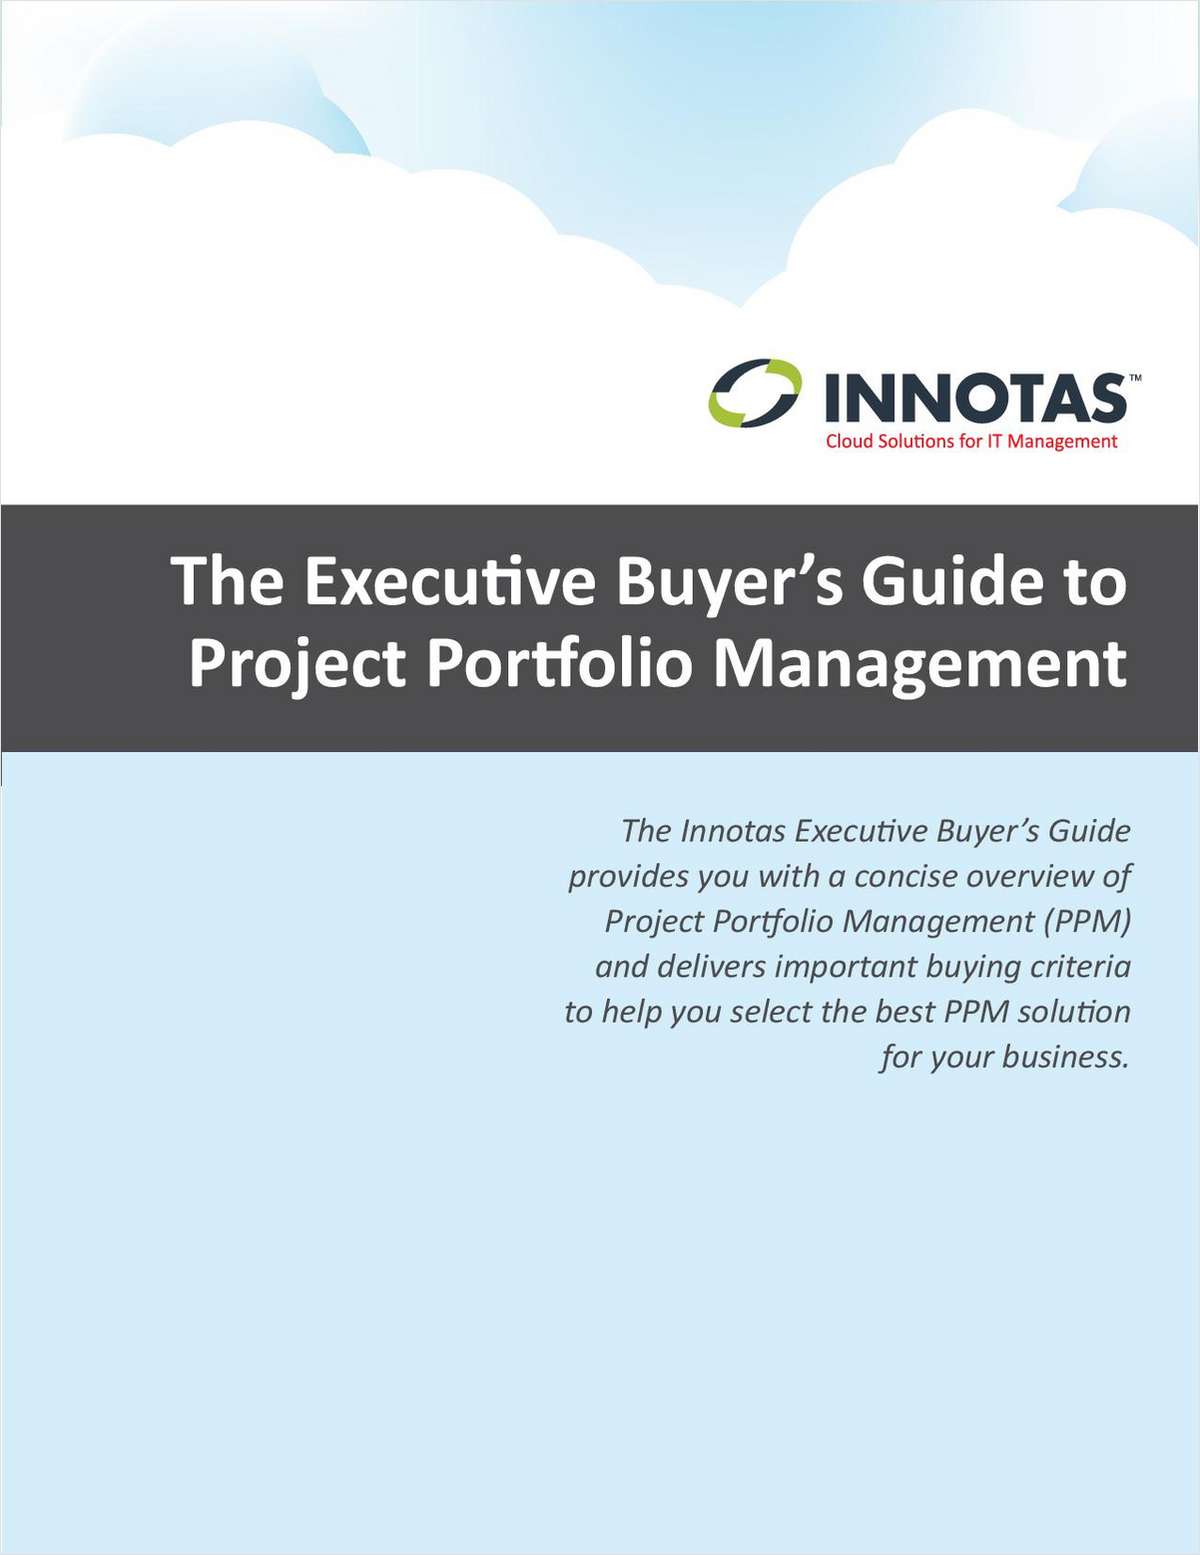 The Executive Buyer's Guide to Project Portfolio Management